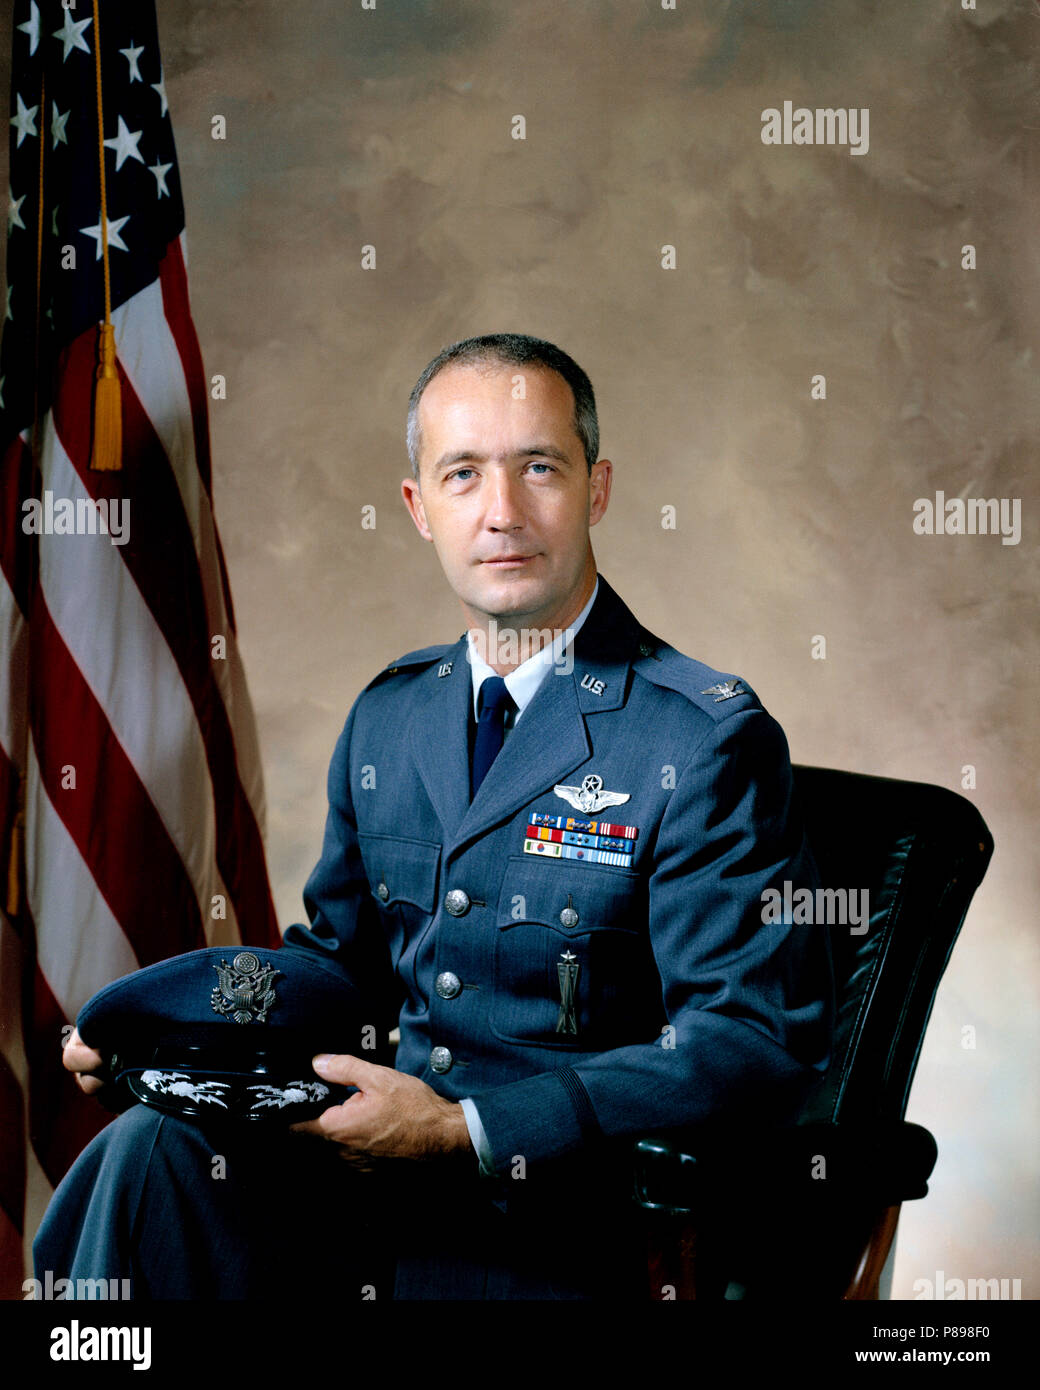 Portrait of astronaut James A. McDivitt, in his Air Force uniform with rank insignia showing he is Air Force Colonel Stock Photo